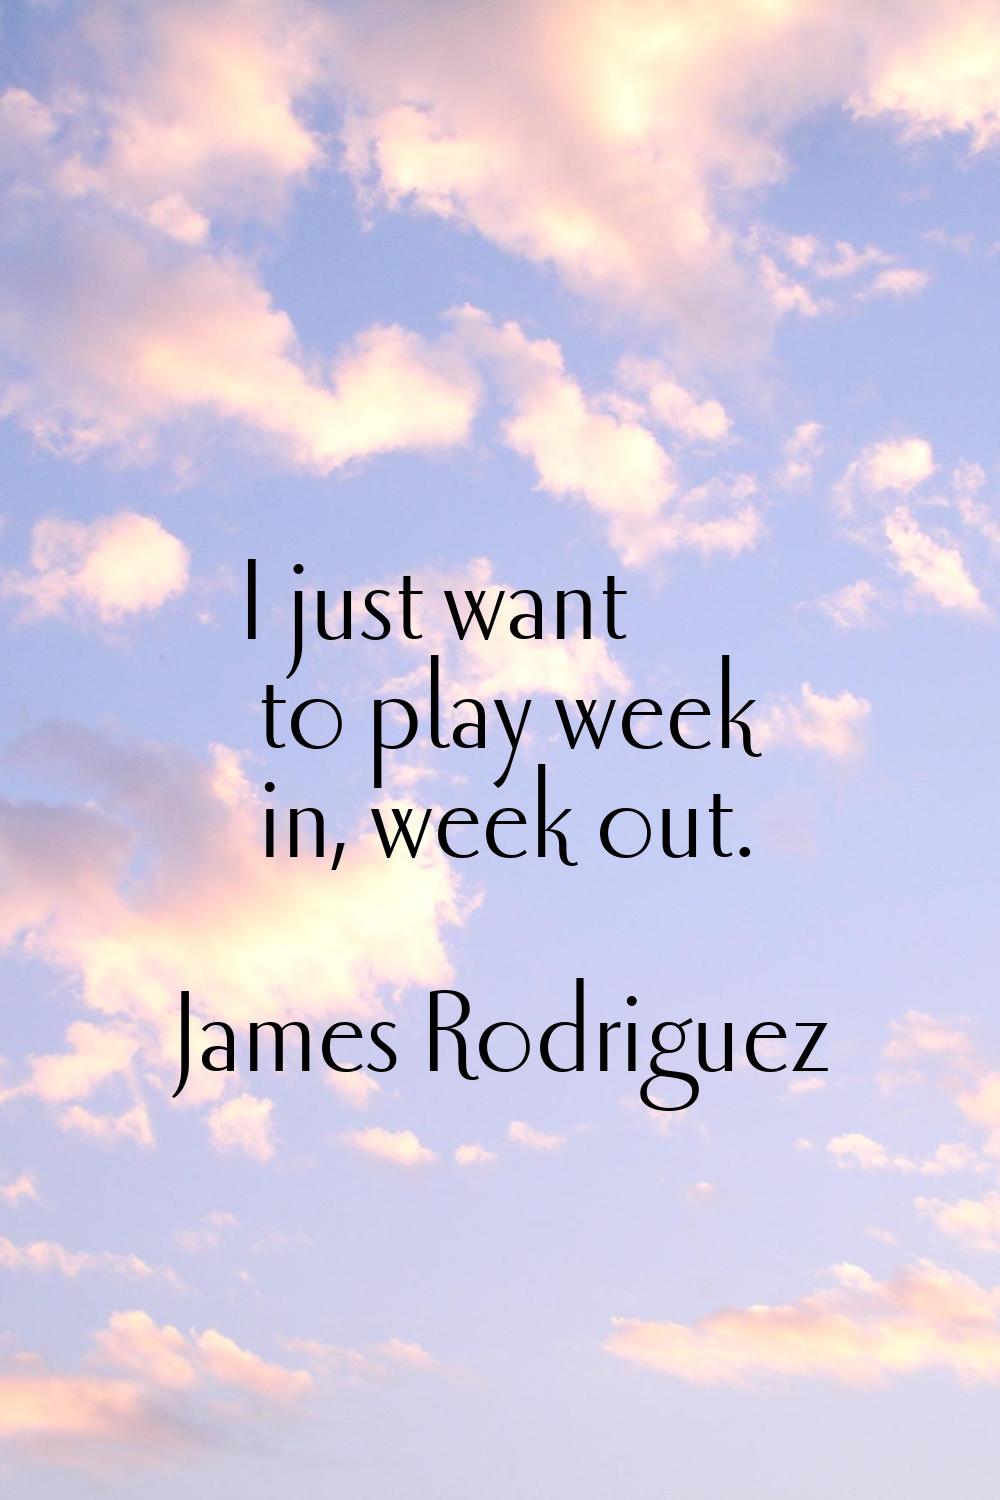 I just want to play week in, week out.